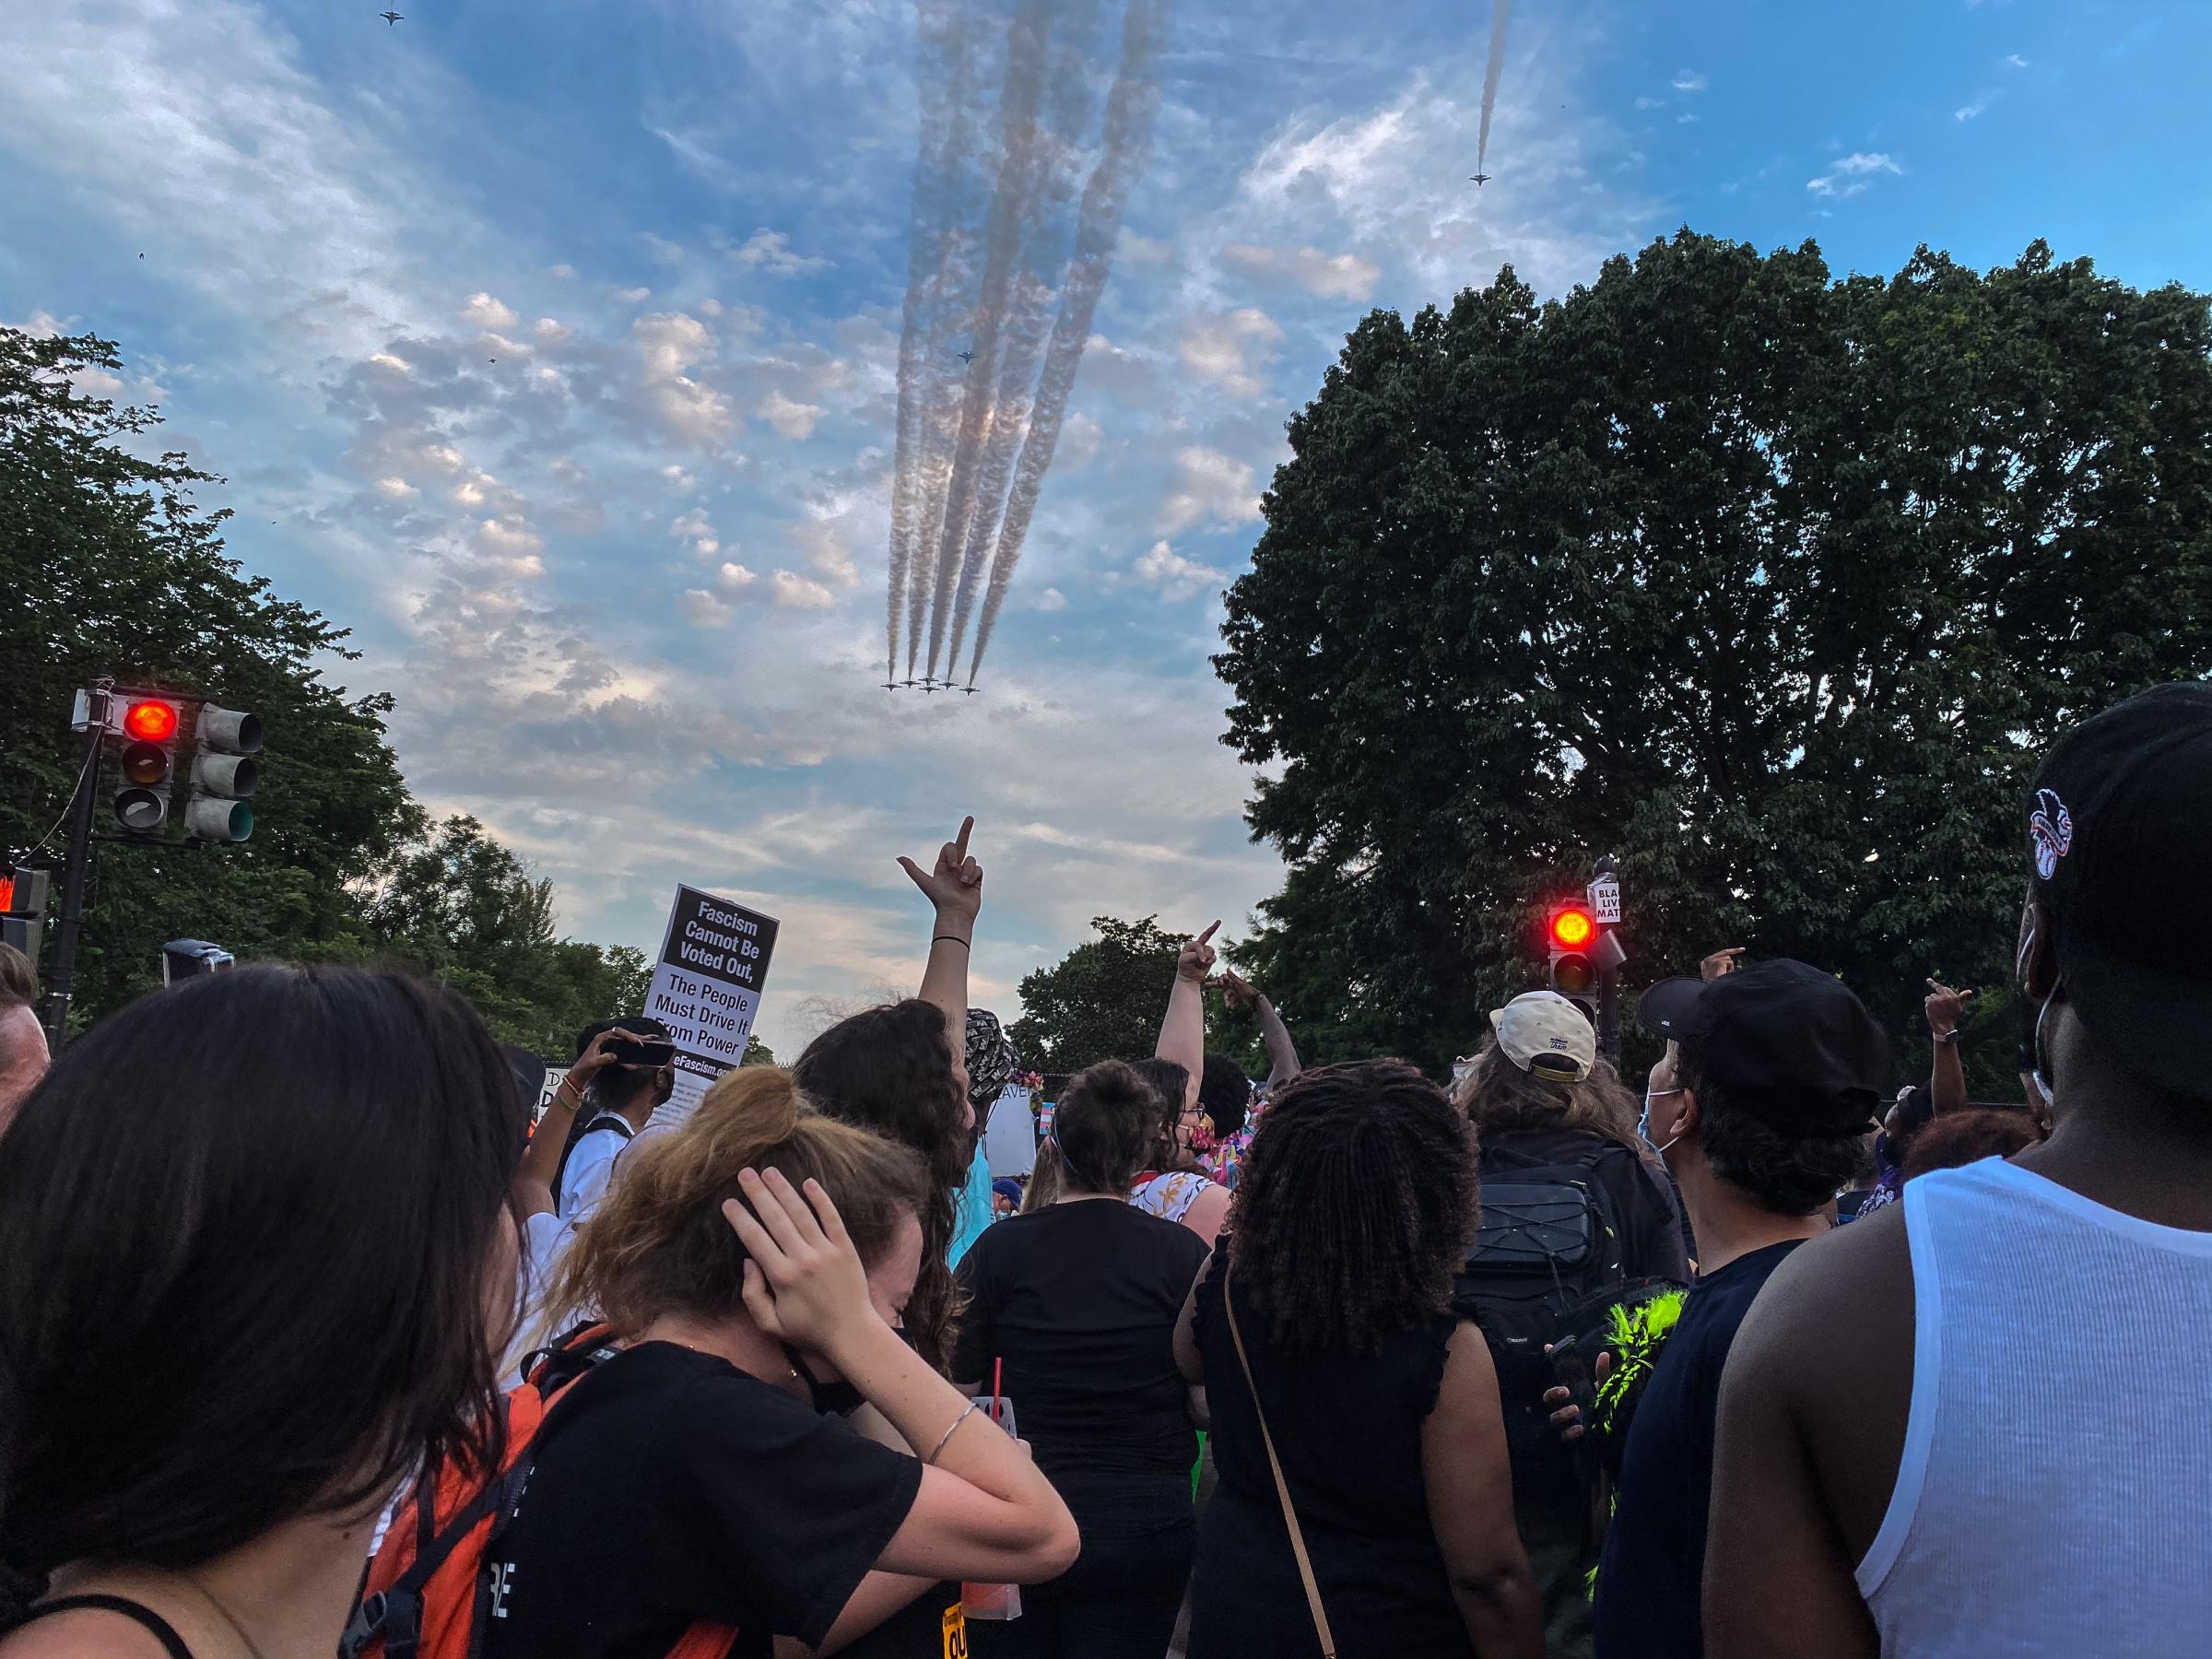 DC: City of Protests - Protestors in front of the White House react to a...